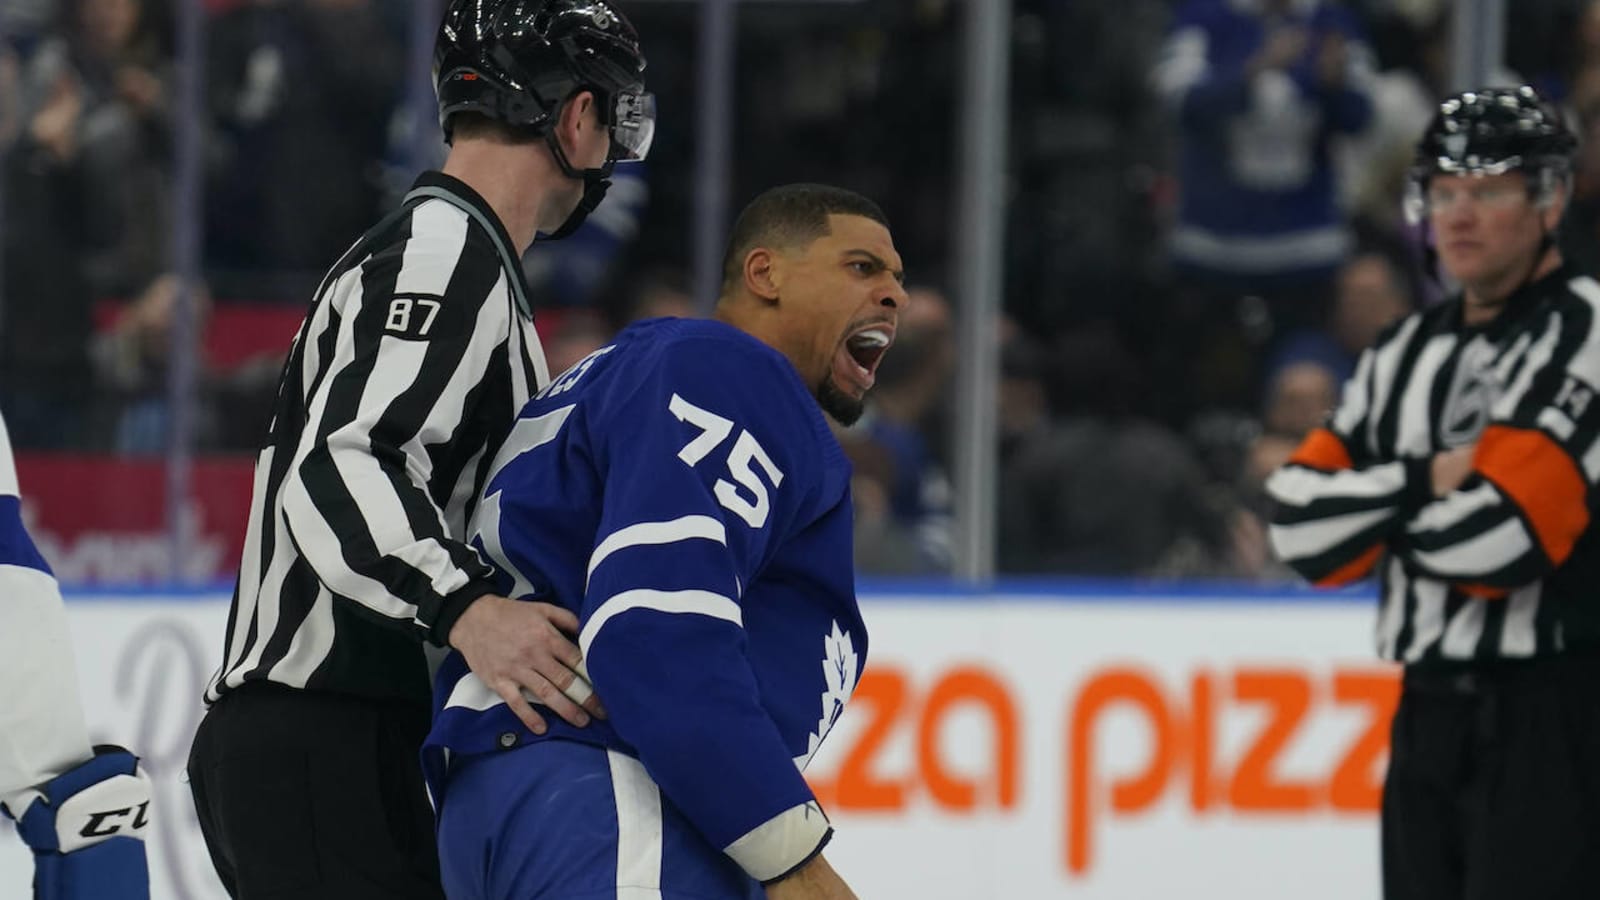 Ryan Reaves has earned the opportunity to play Game 1 for the Leafs